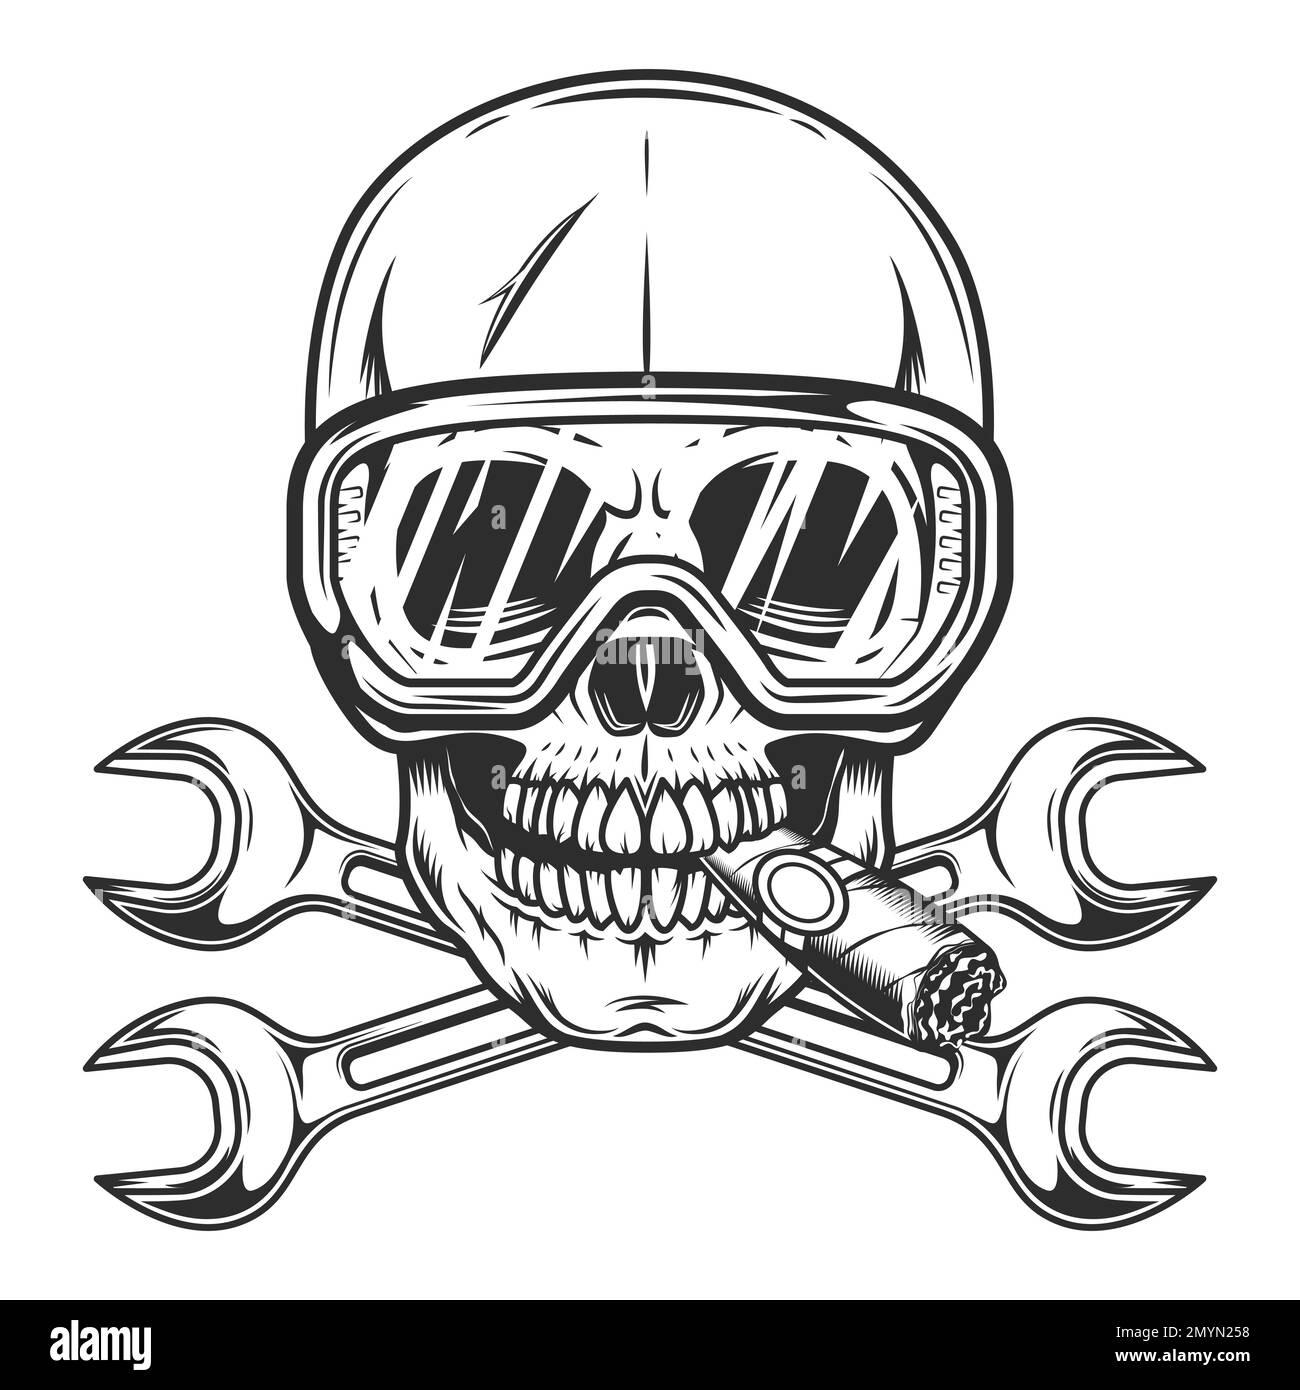 Vintage skull smoking cigar or cigarette smoke in glasses with body shop service car and truck mechanic repair tool crossed wrench or construction Stock Vector